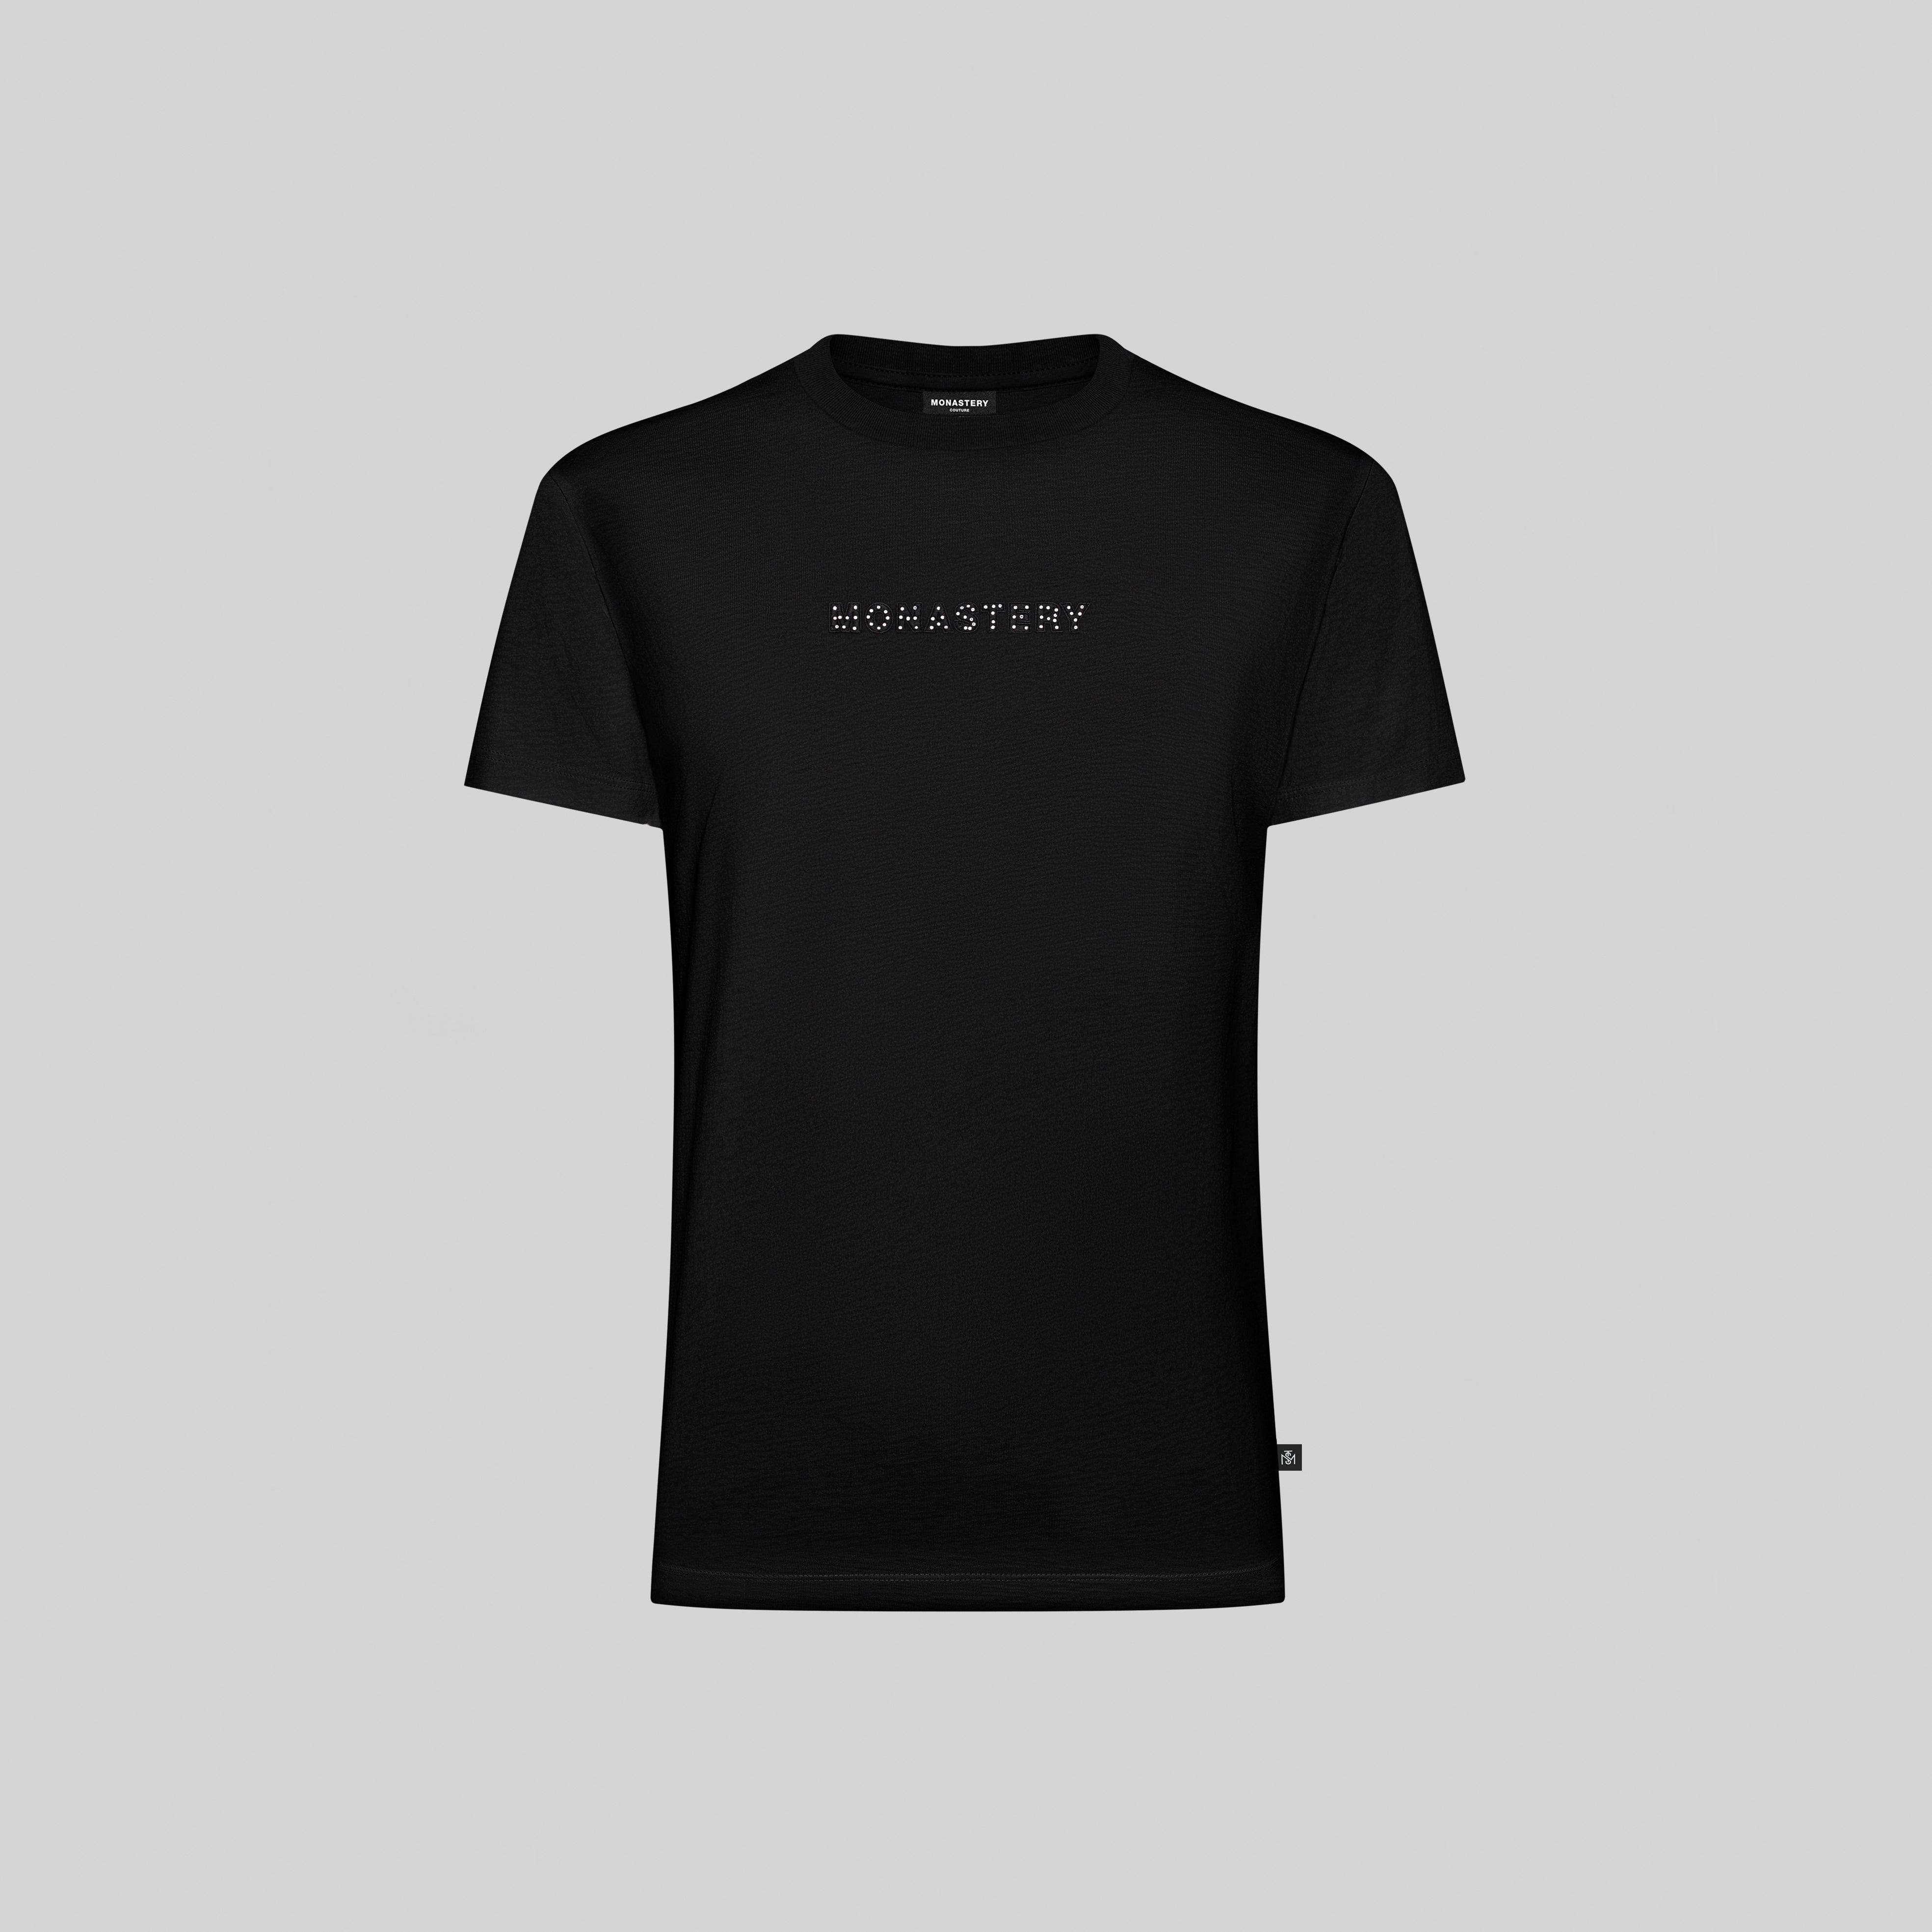 ELANY BLACK T-SHIRT | Monastery Couture